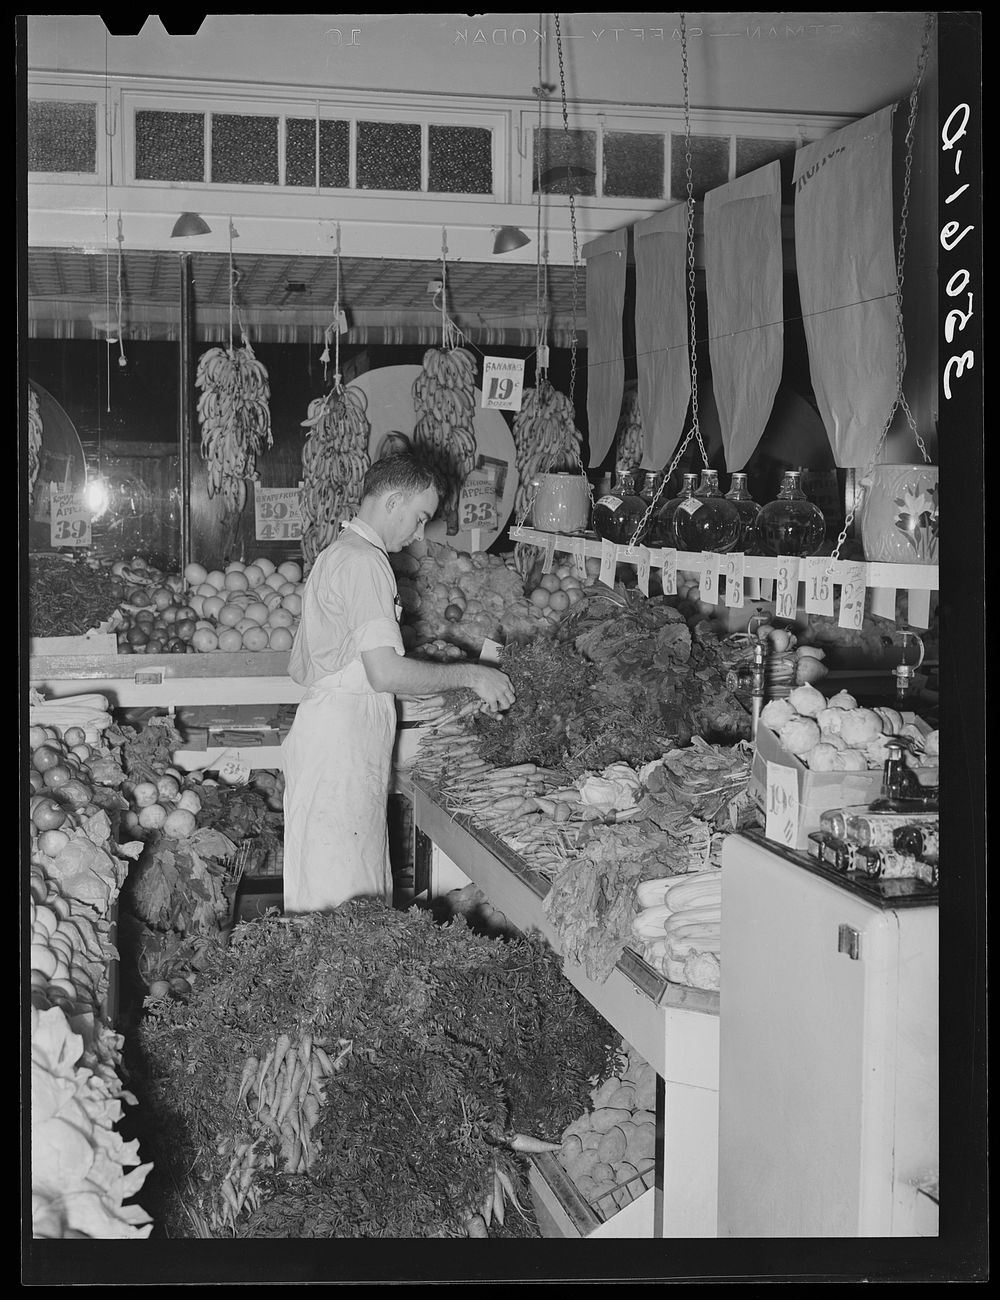 Arranging vegetables at retail grocery. San Angelo, Texas by Russell Lee